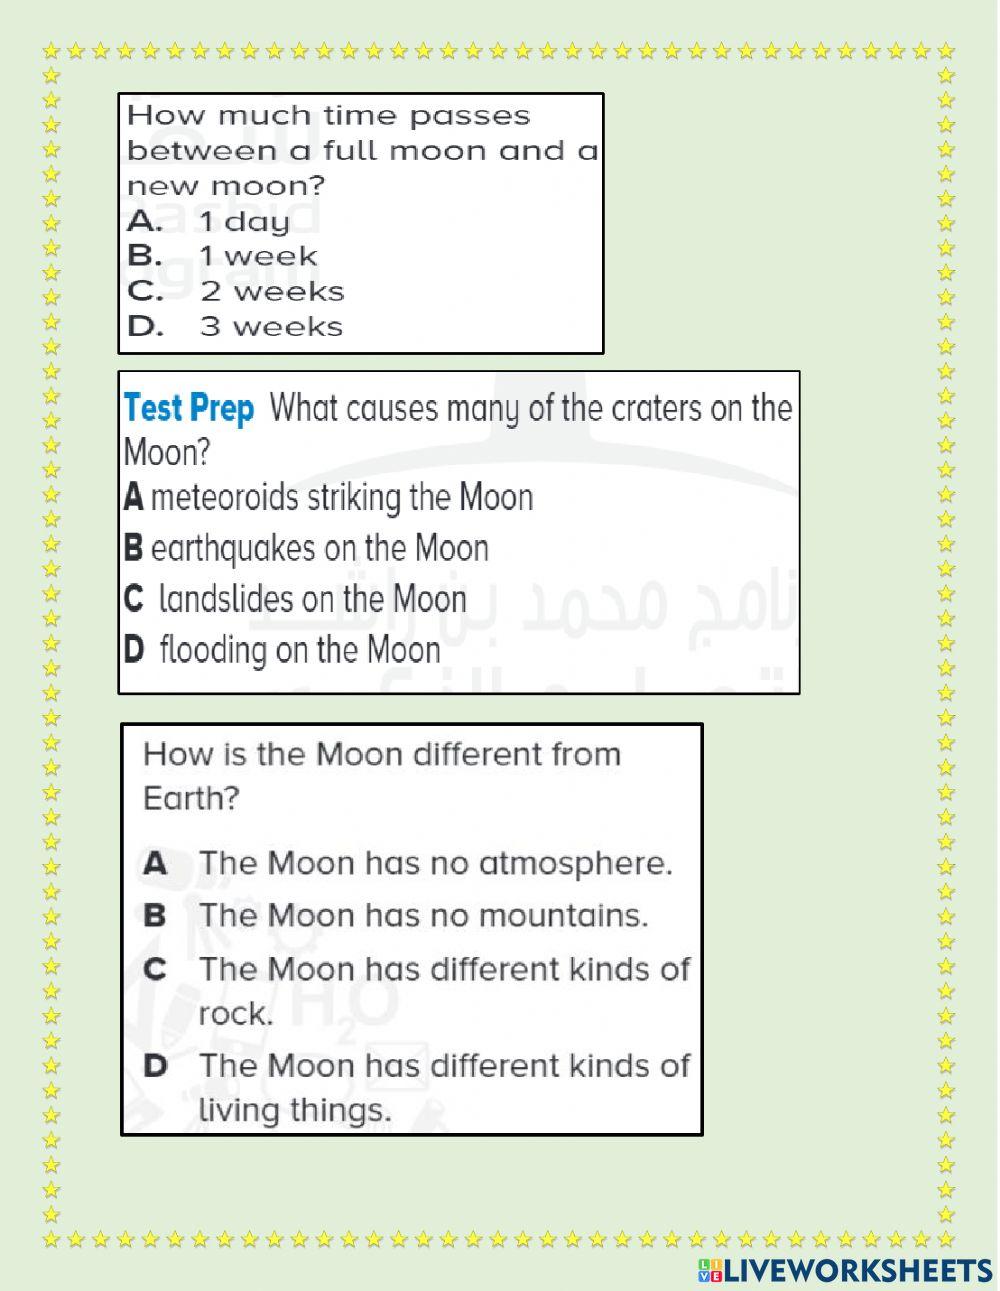 Chapter 10 lesson 2- EARTH AND MOON PART 2